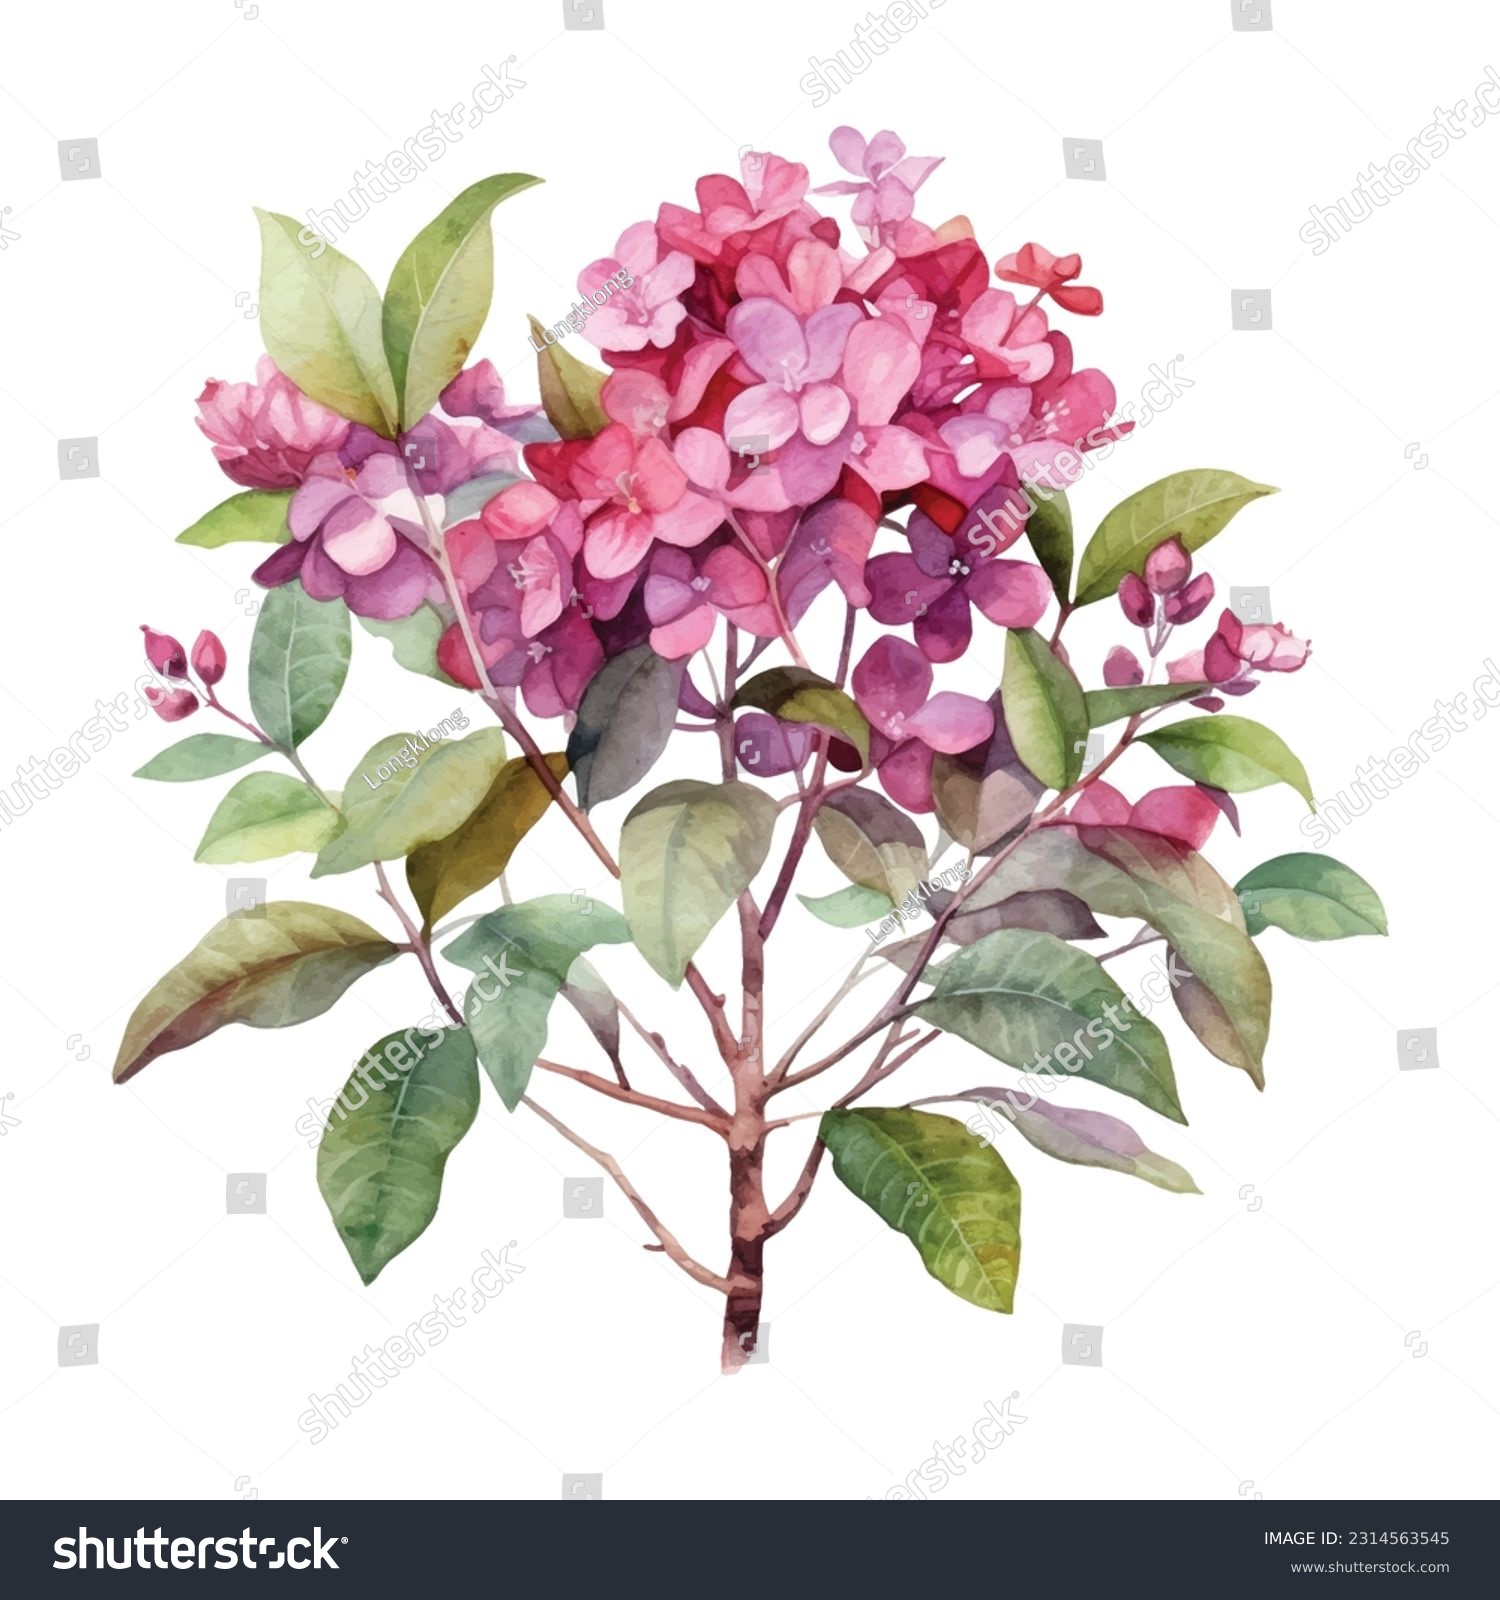 SVG of Queen Crape Myrtle watercolor illustration. Hand drawn underwater element design. Artistic vector marine design element. Illustration for greeting cards, printing and other design projects. svg